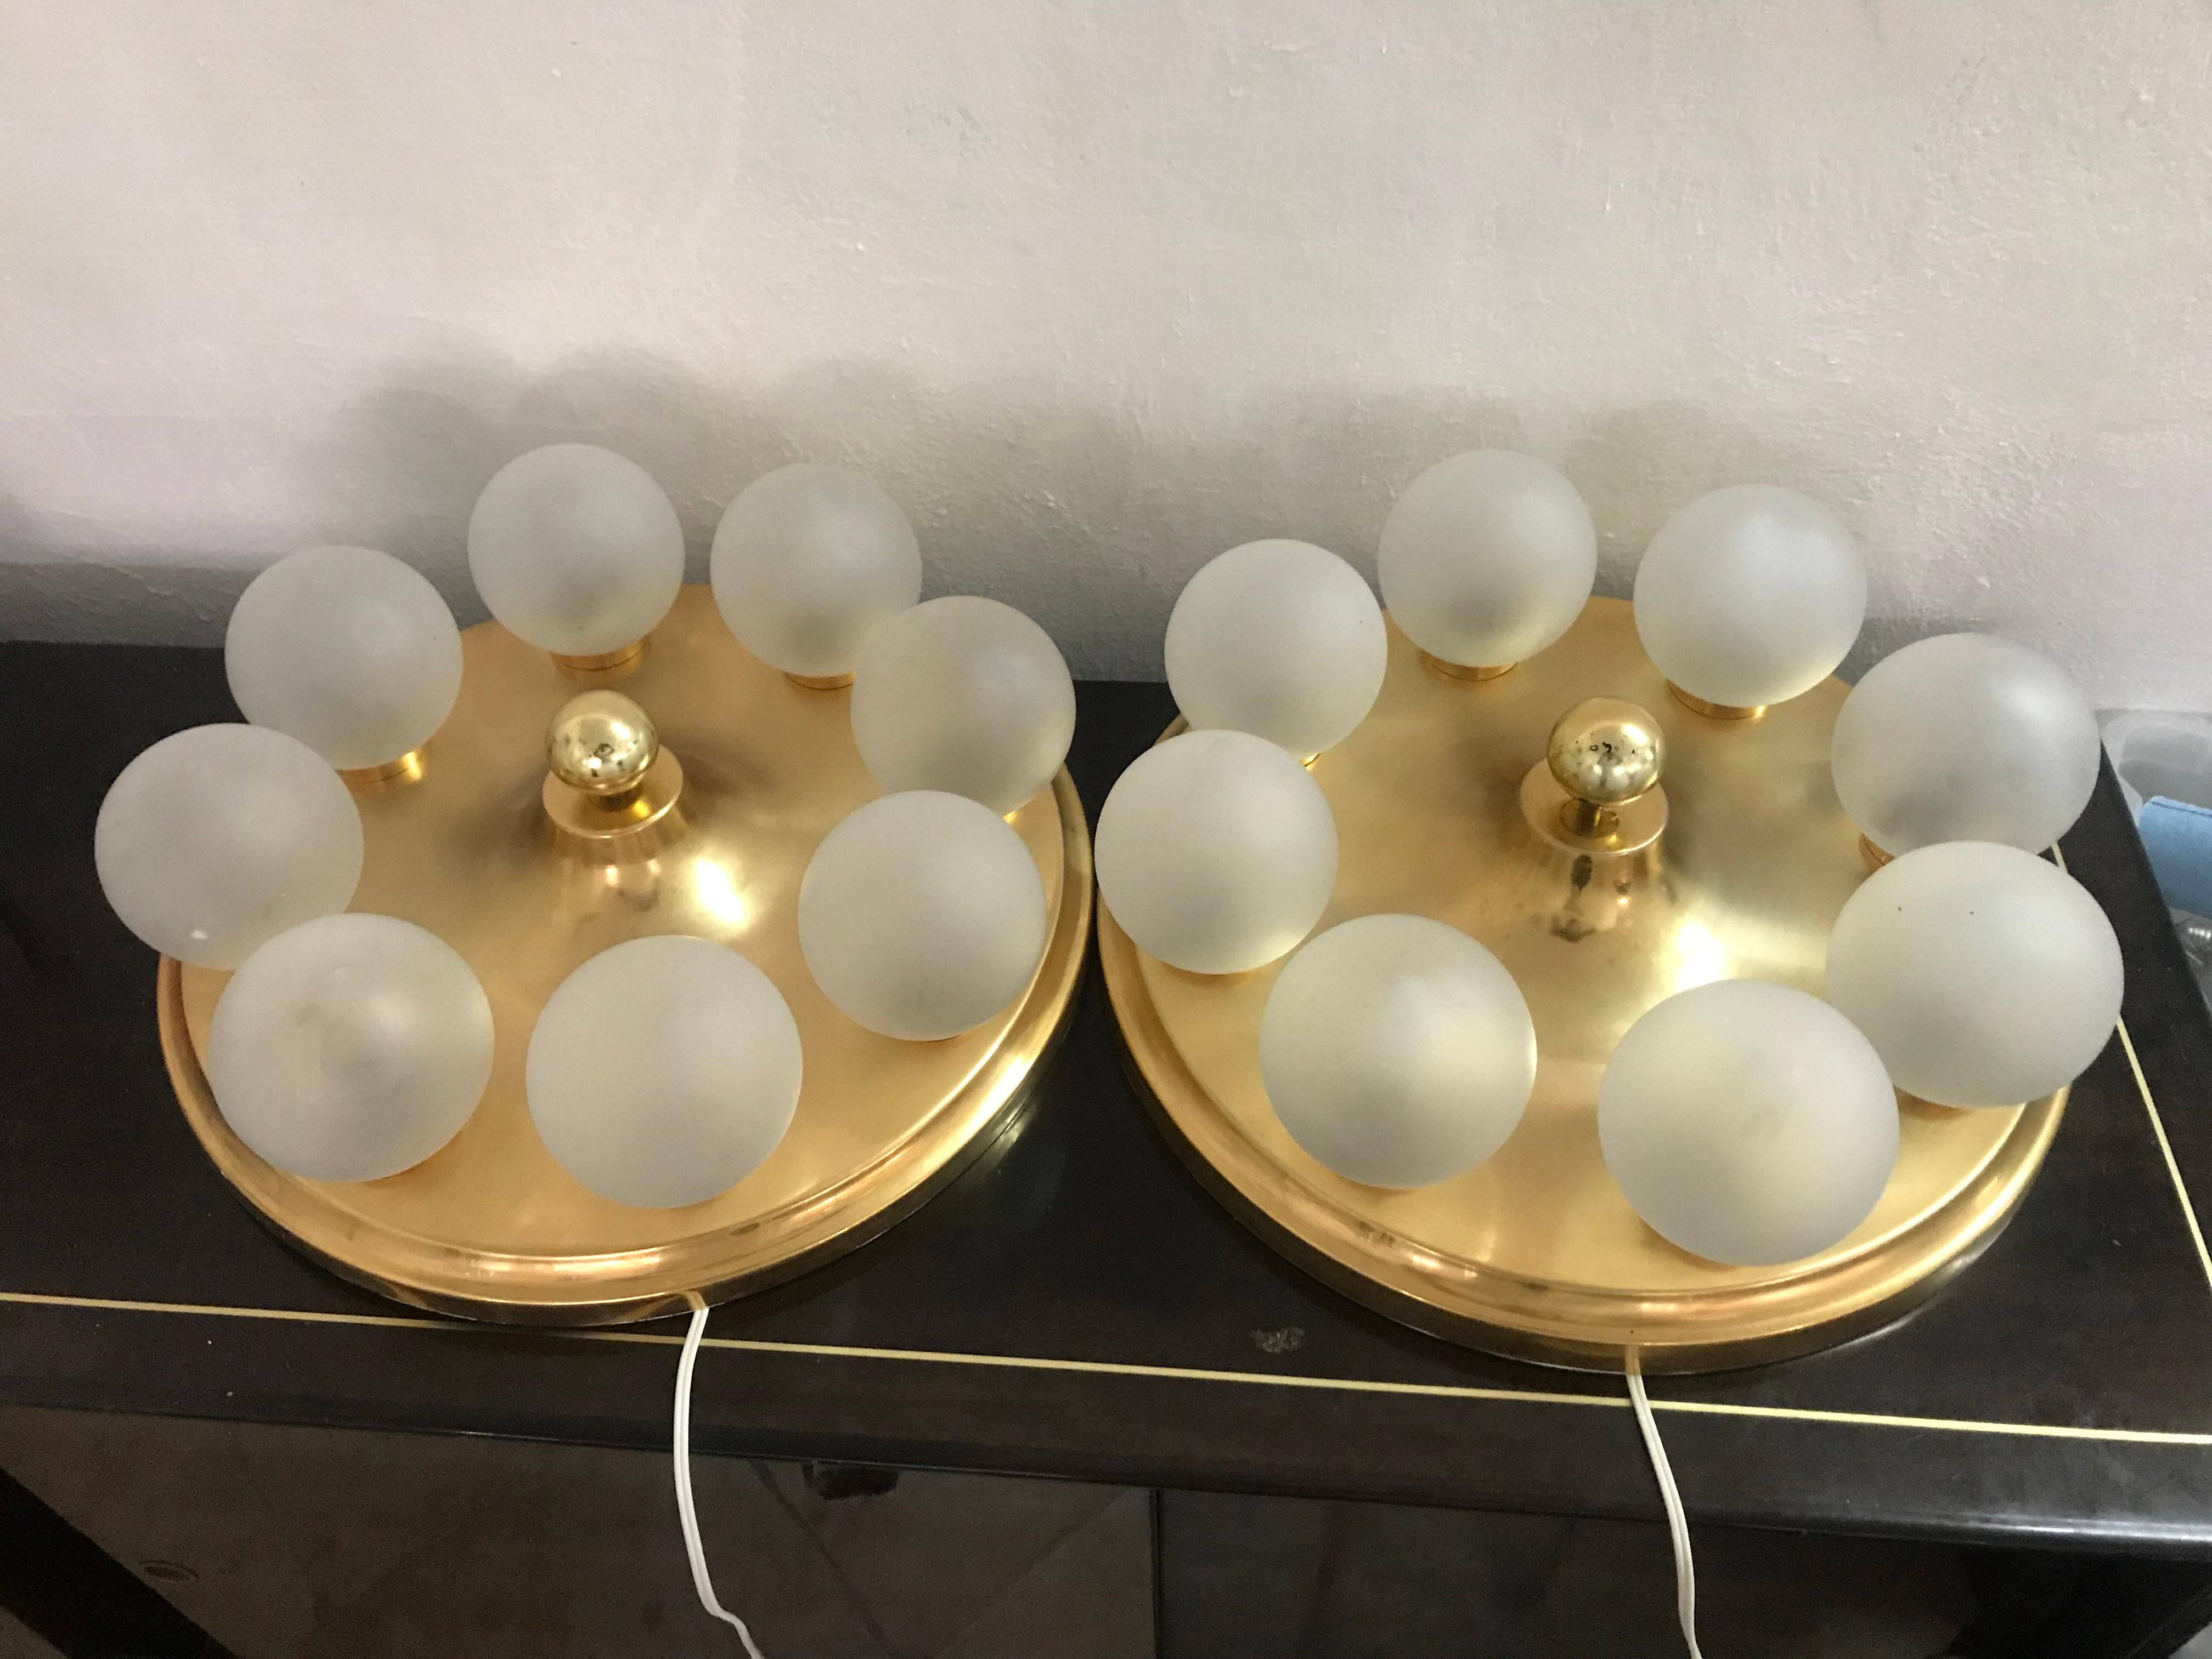 Pair of large Mid-Century Modern 8 light plafonnier or flush mount by Kinkeldey, Made in Austria, circa 1970, still retaining the original Label and in great vintage condition.
Priced individually.